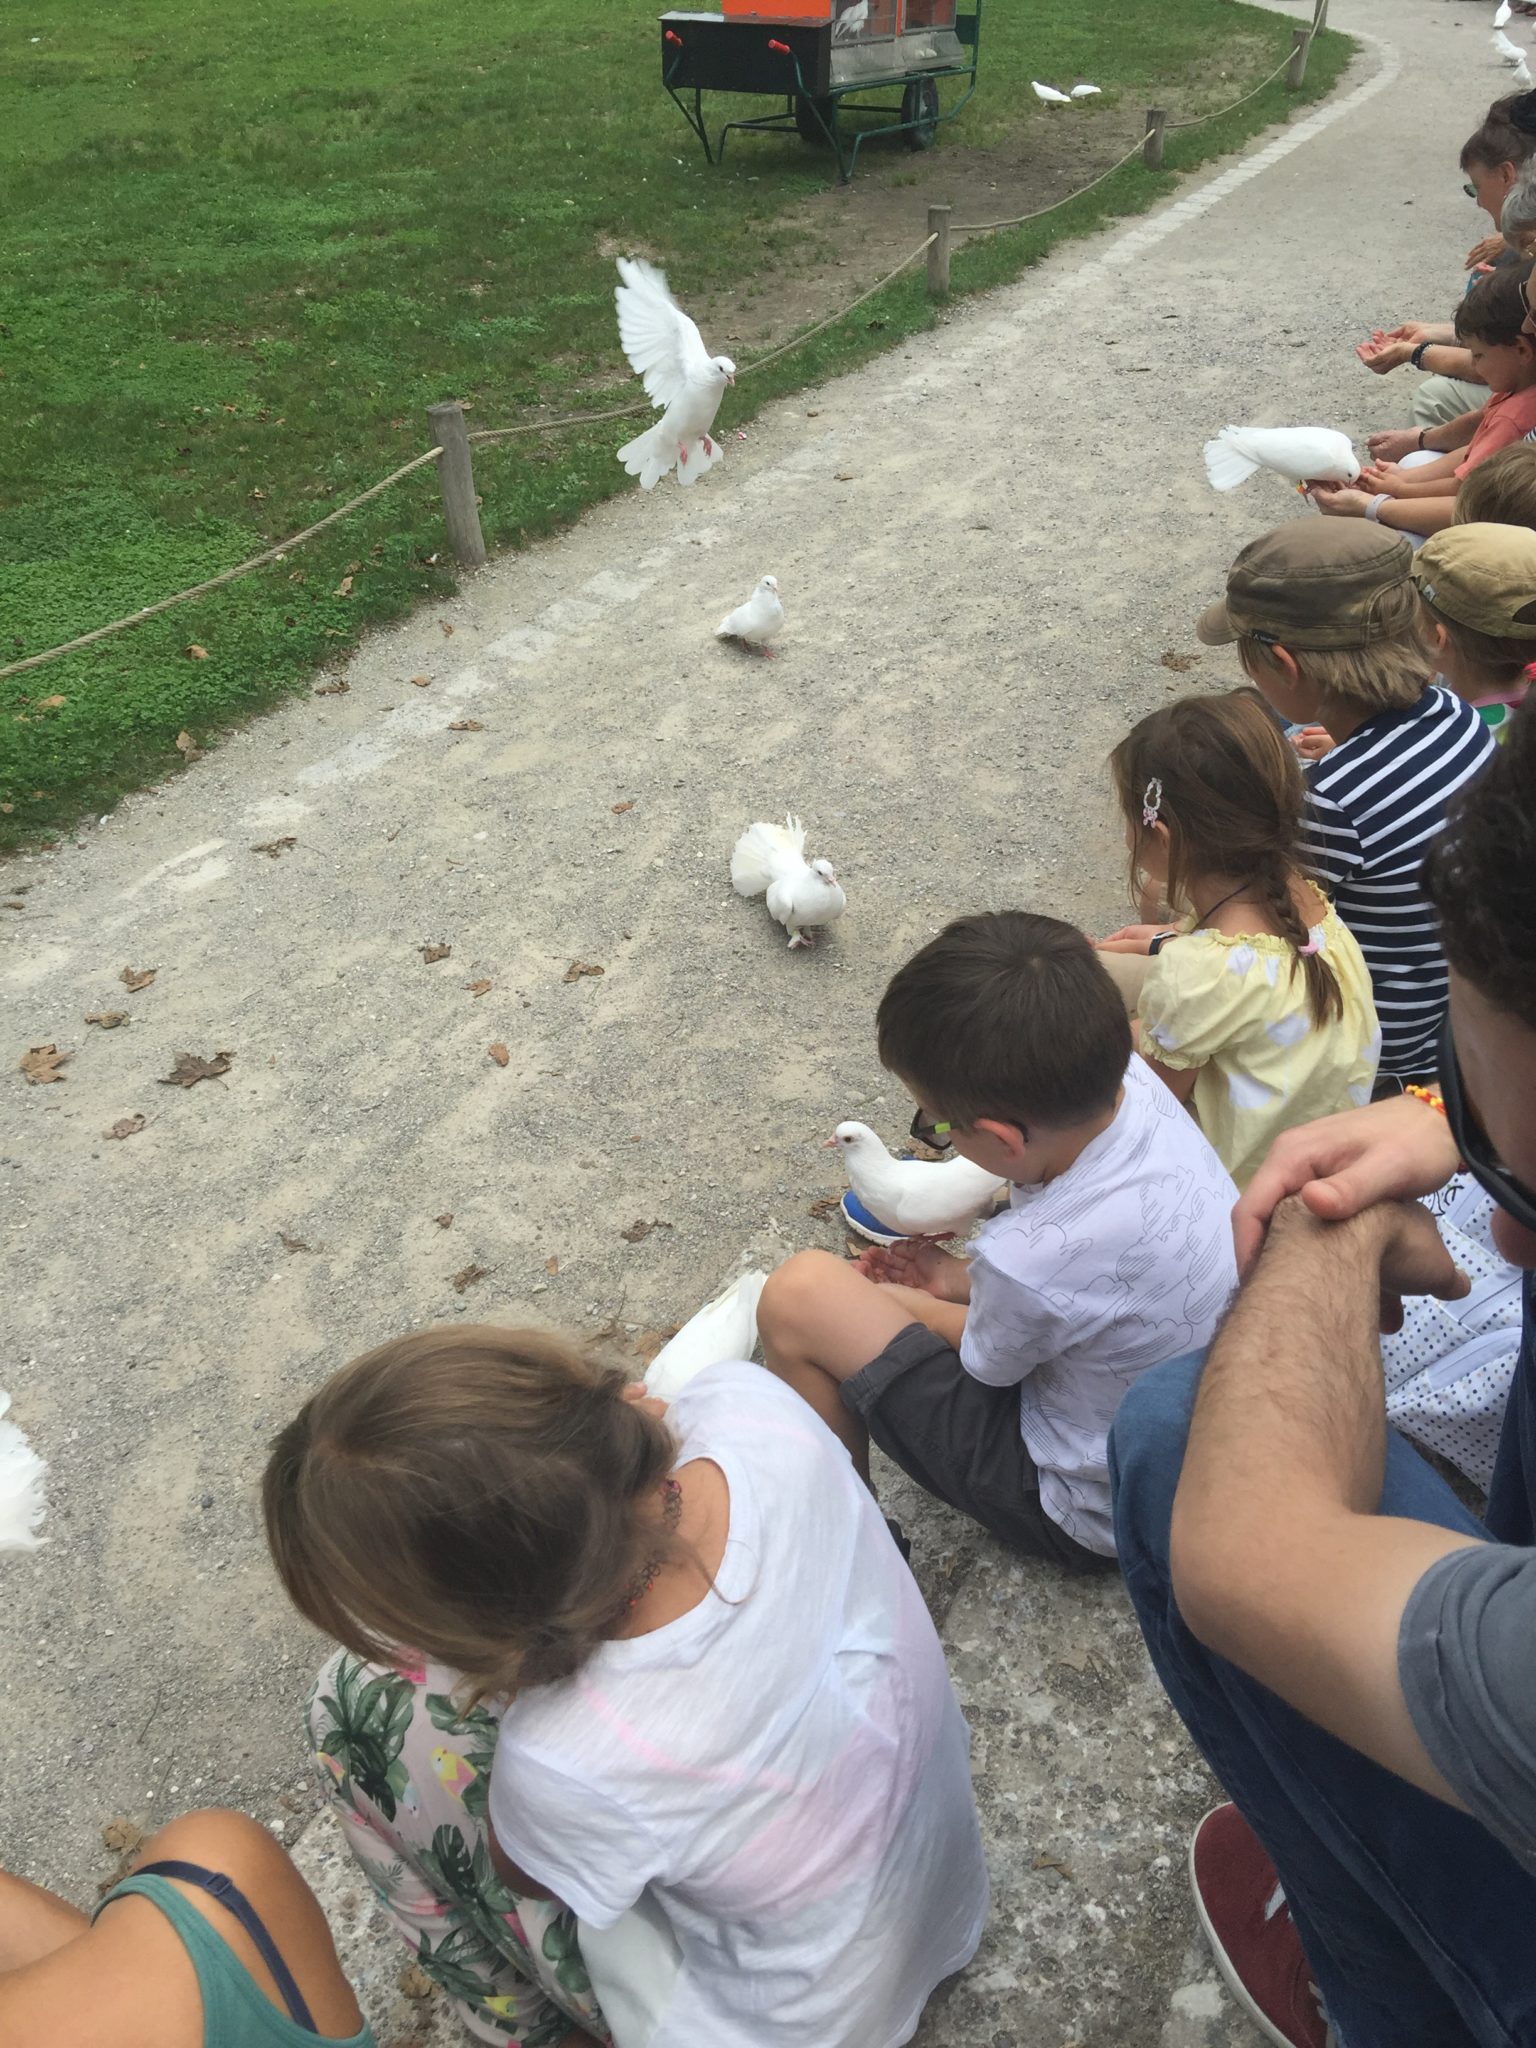 Feeding the acrobatic pigeons at the Hellabrunn Zoo